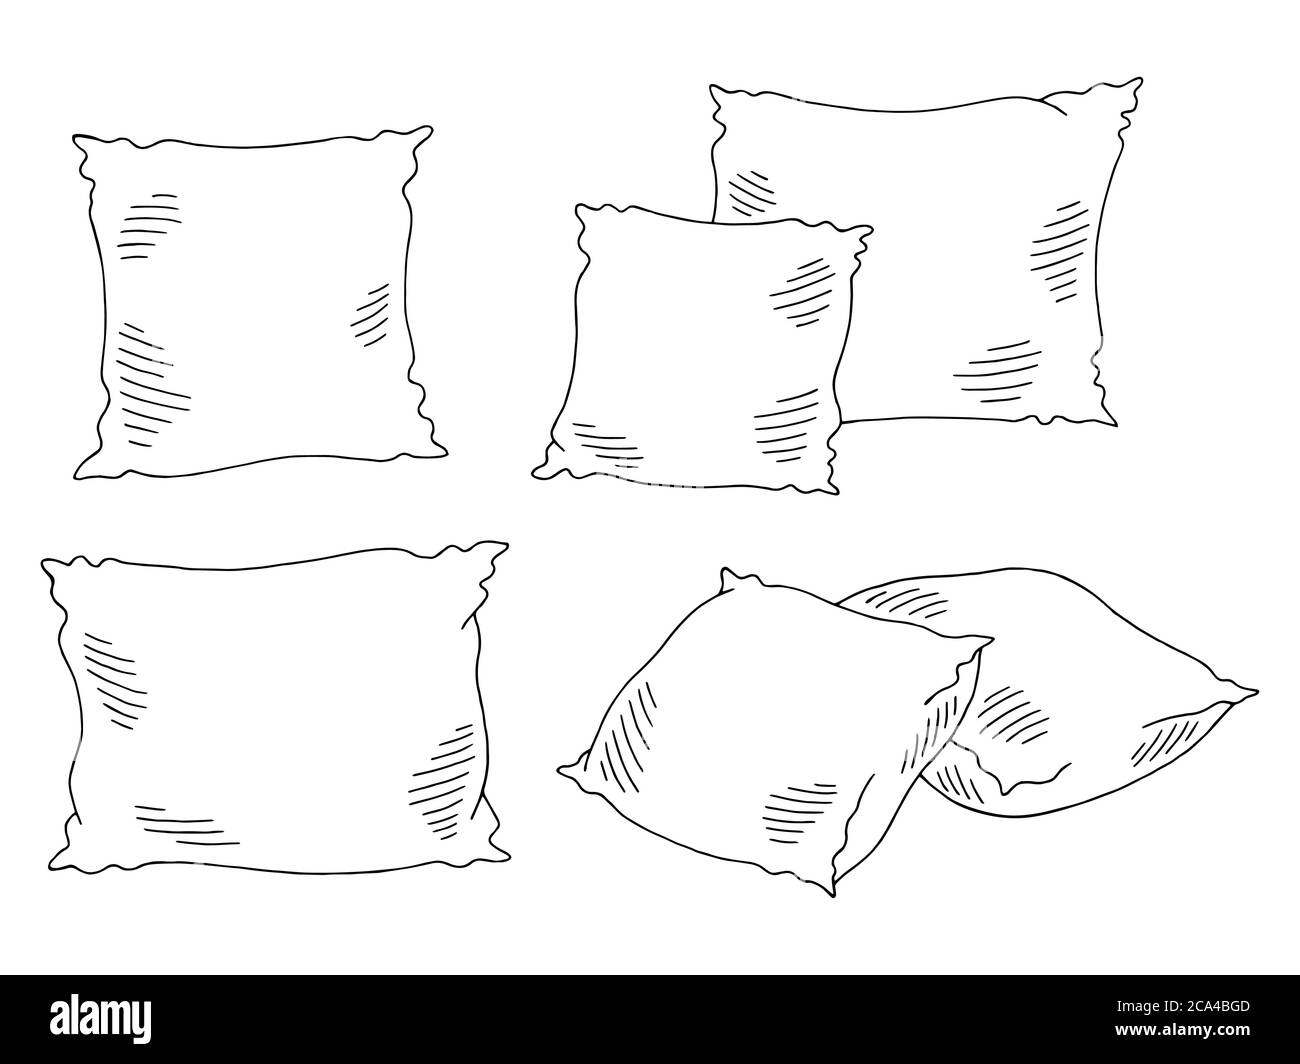 Pillows set graphic black white isolated sketch illustration vector Stock Vector